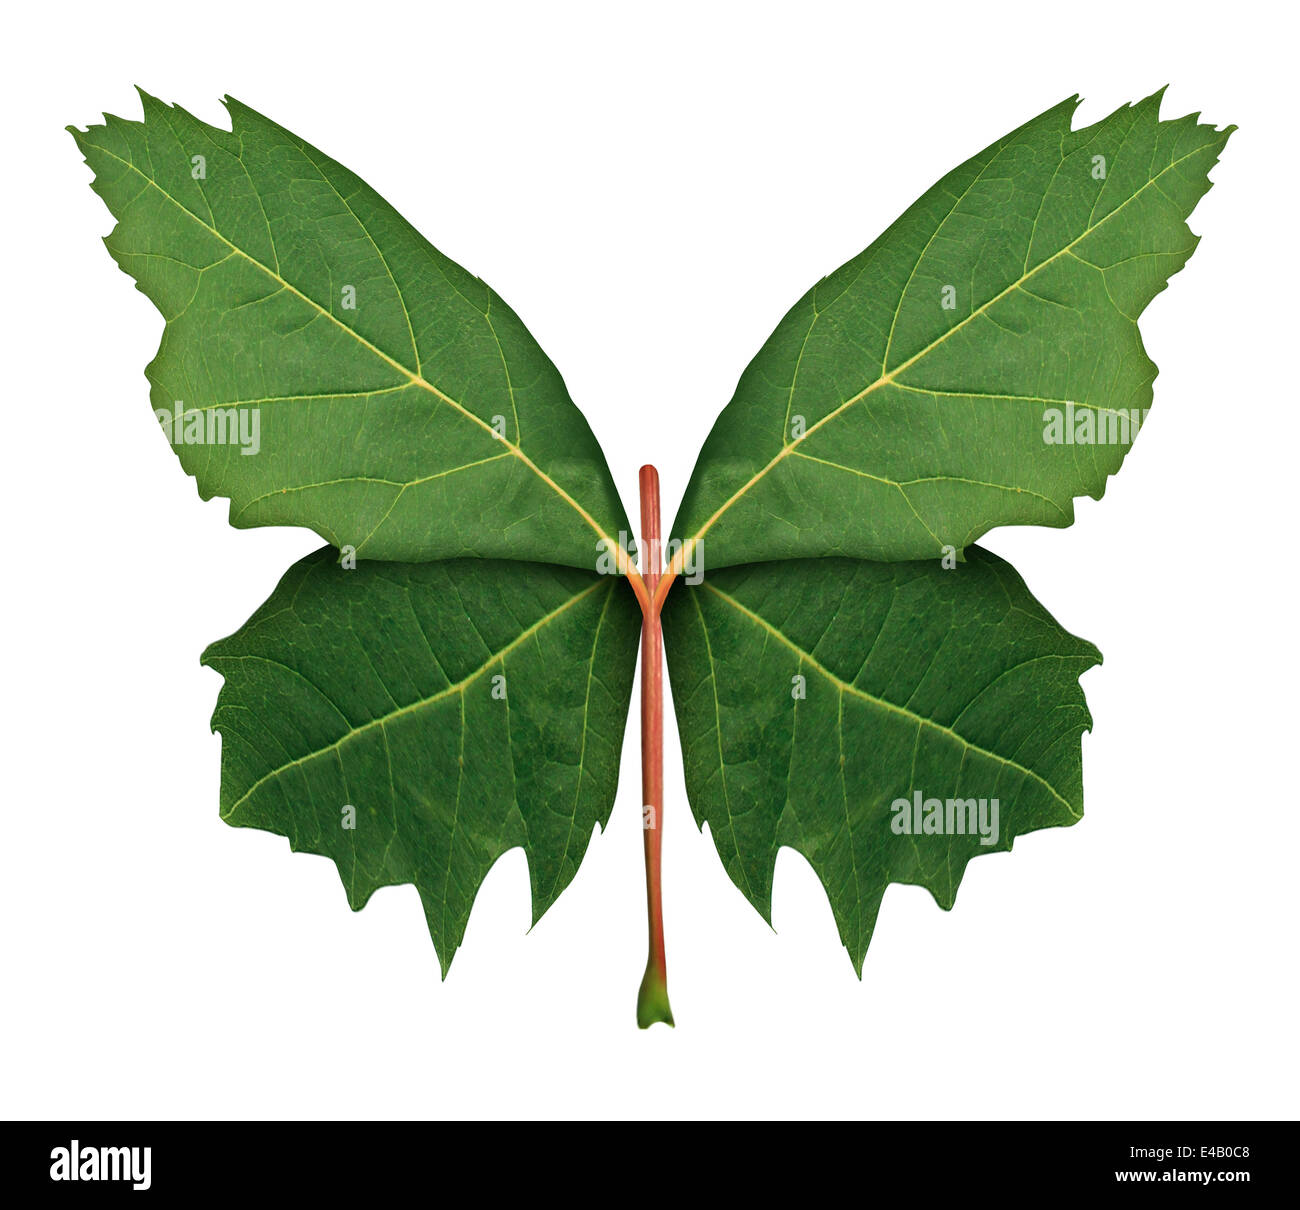 Nature and hope as a symbol of growth and development with a front view green maple leaf shaped as the open wings of a butterfly as a metaphor for learning discovery and imagination isolated on a white background. Stock Photo